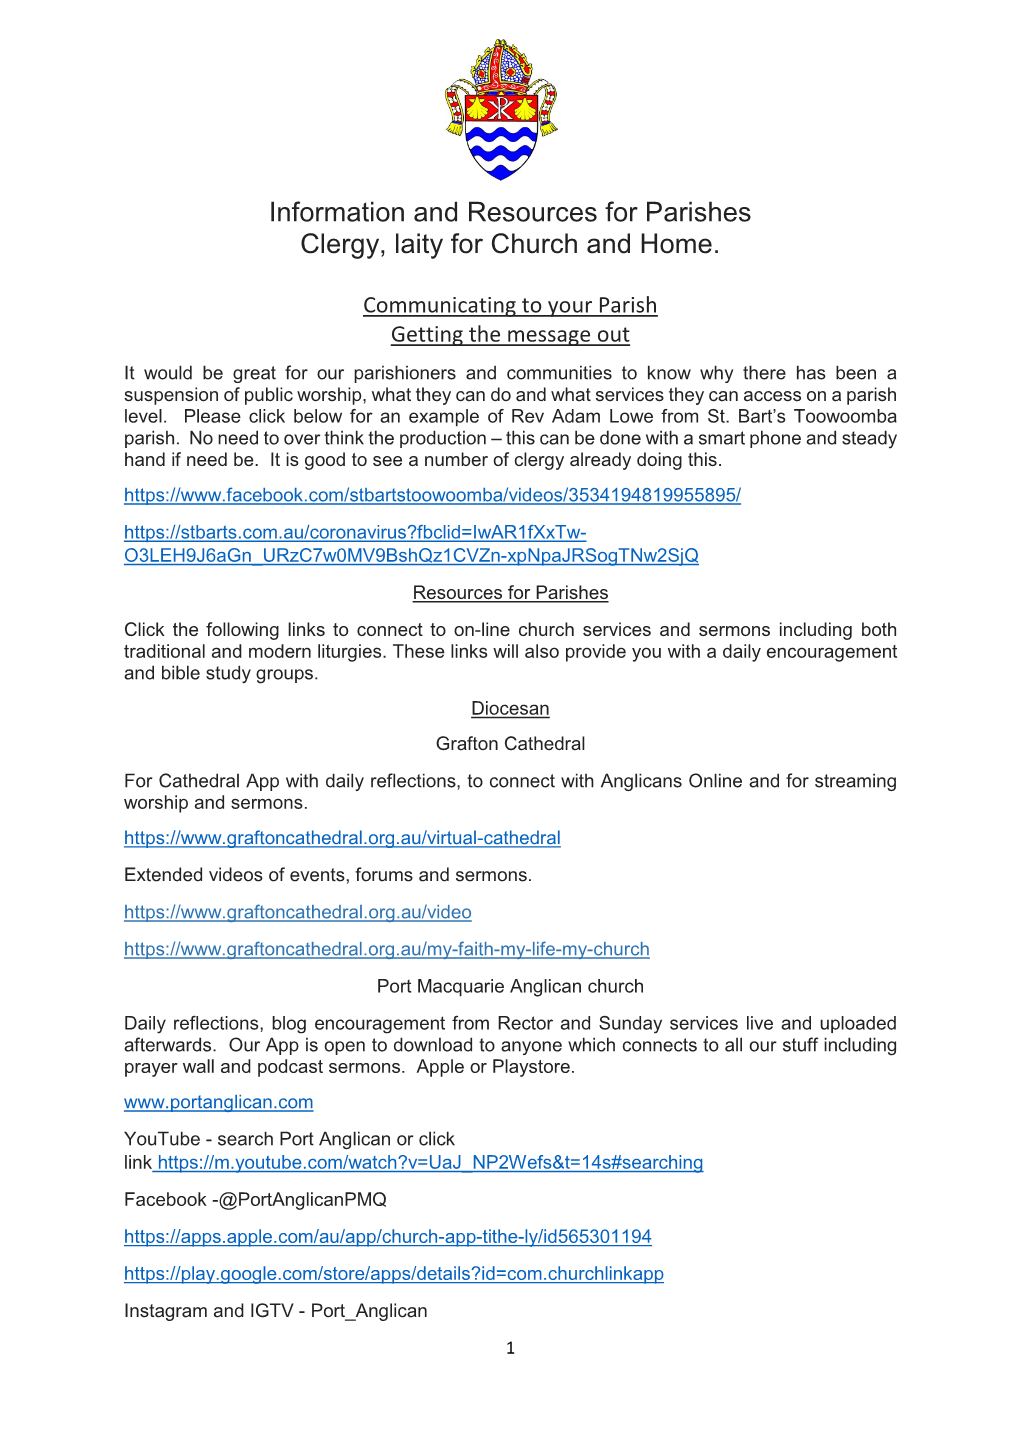 Information and Resources for Parishes Clergy, Laity for Church and Home